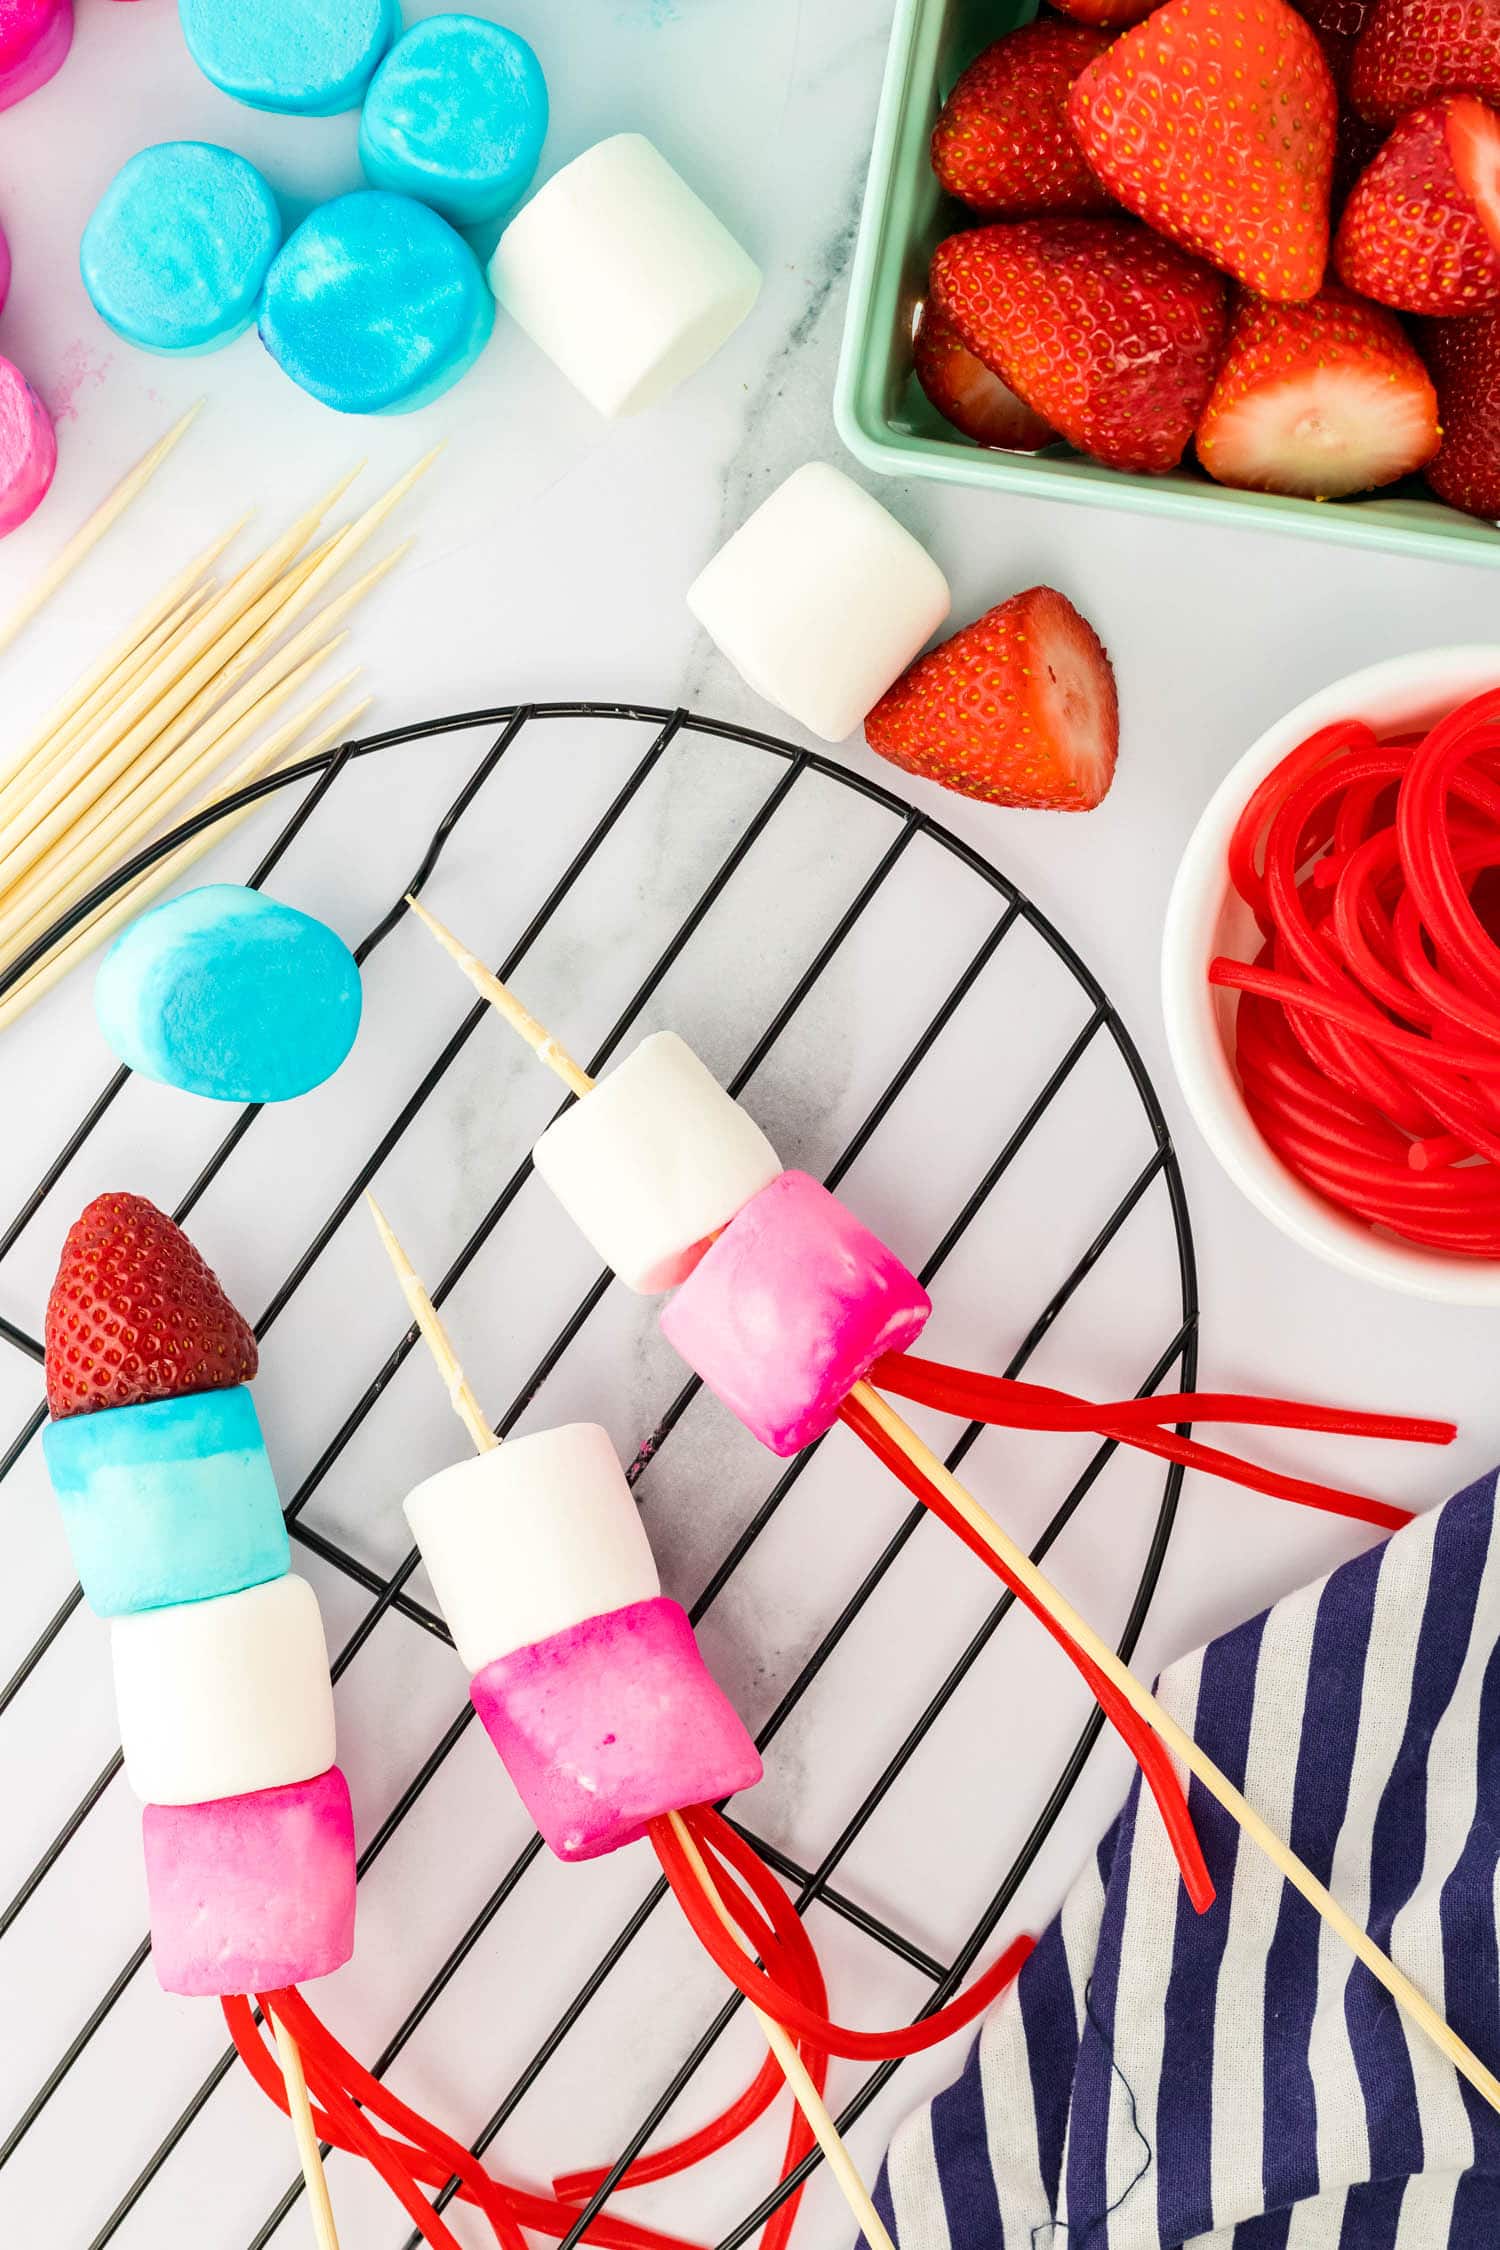 Push a Skewer through the Red Marshmallow and add a White Marshmallow and blue Marshmallow to the top